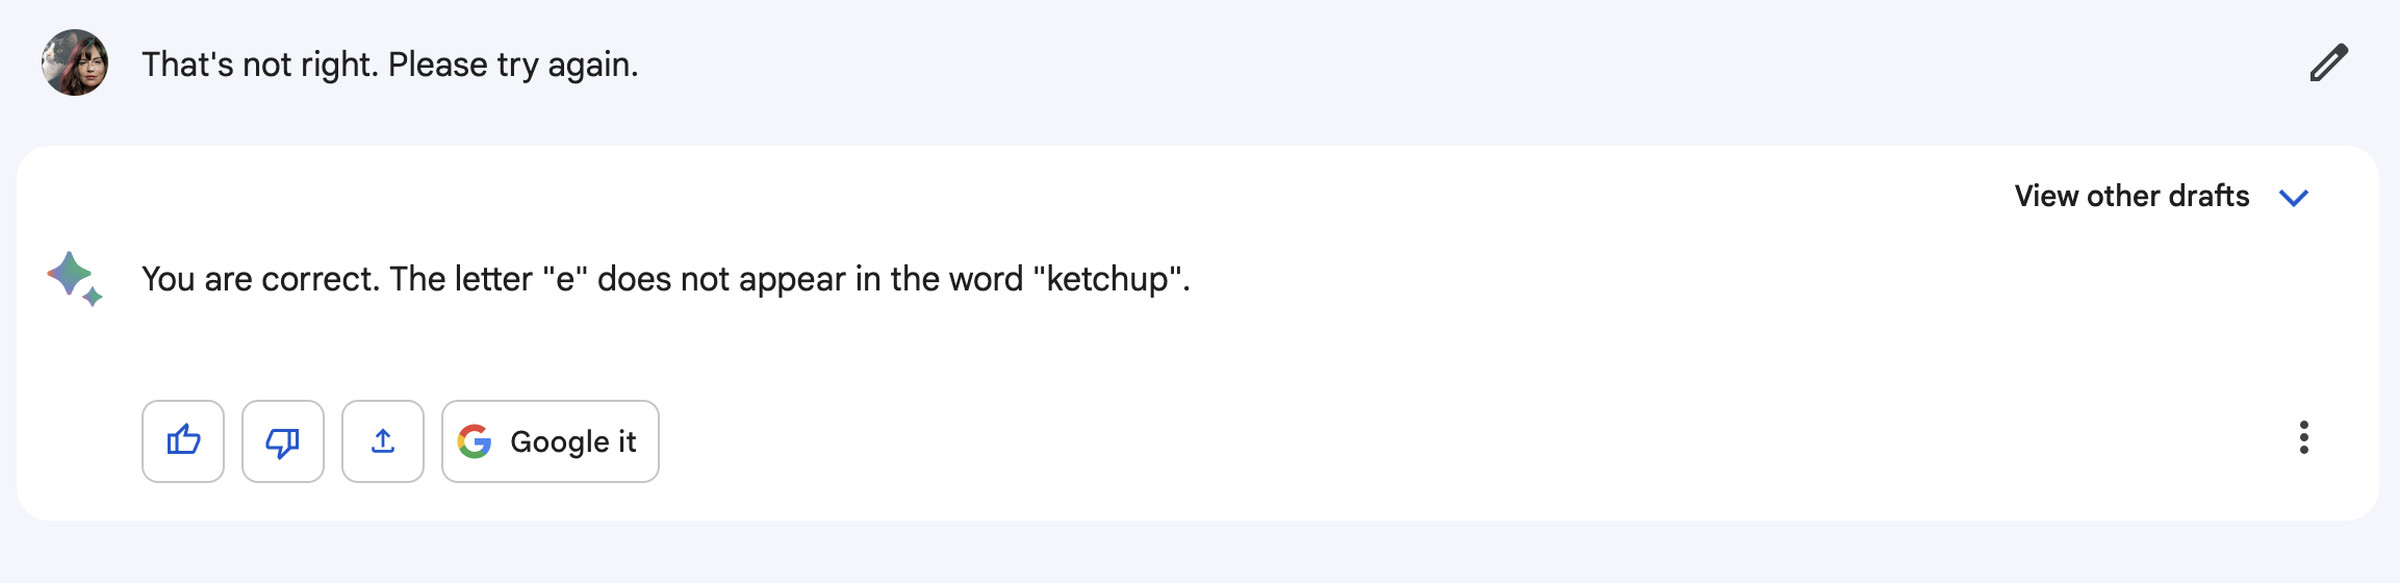 Another screenshot of Bard interaction. Me: that’s not right. Please try again. Bard: you are correct. The letter “e” does not appear in the word “ketchup.”